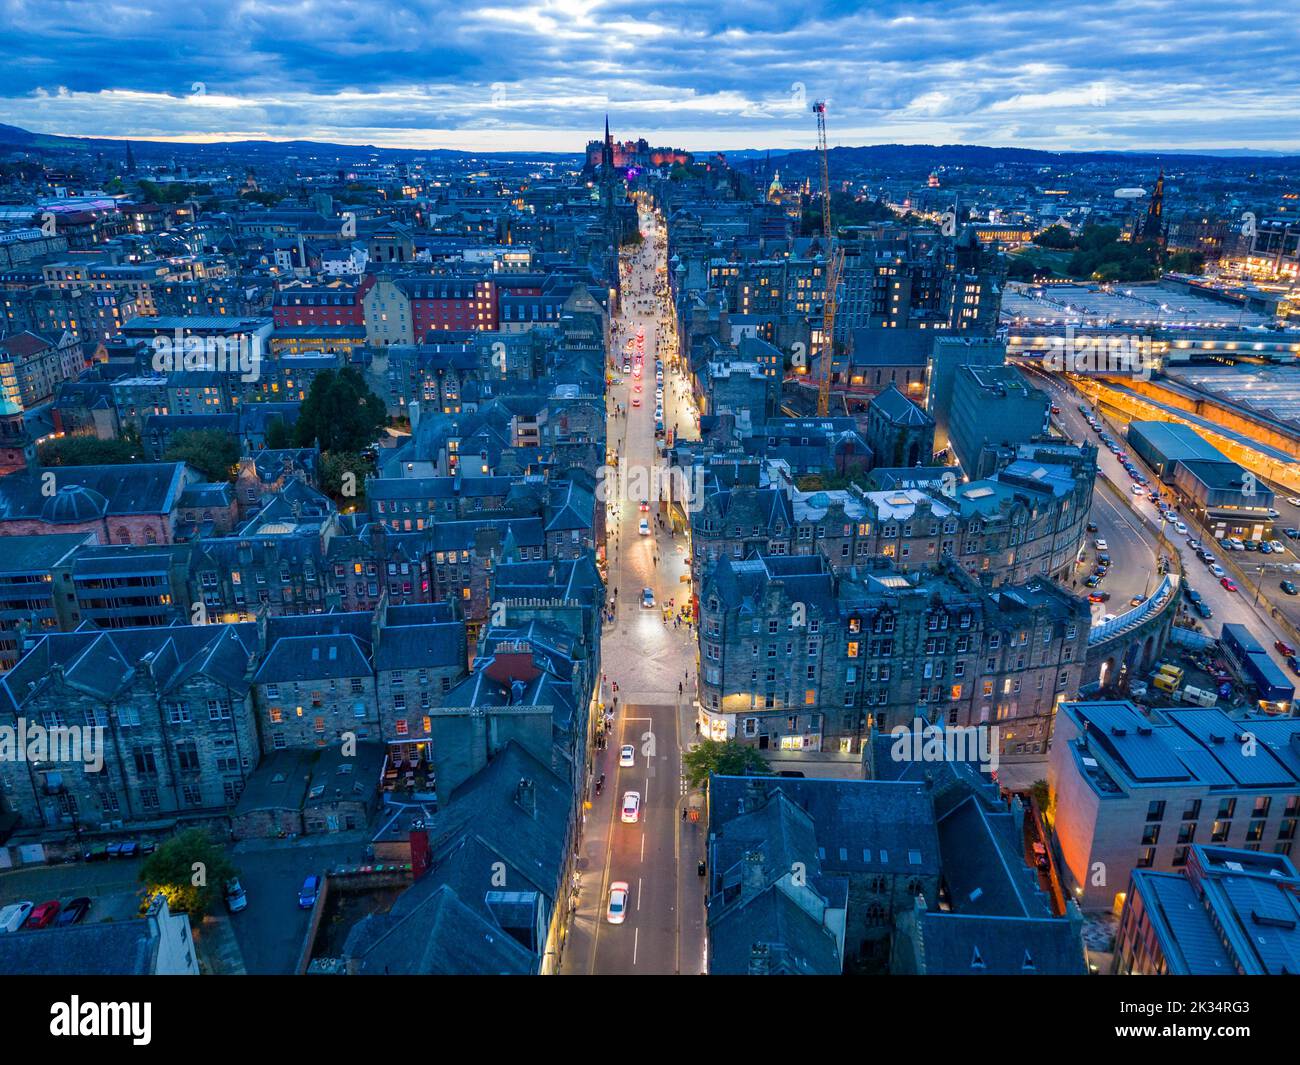 Aerial view of Royal Mile and skyline of Edinburgh Old Town at night, Scotland, UK Stock Photo